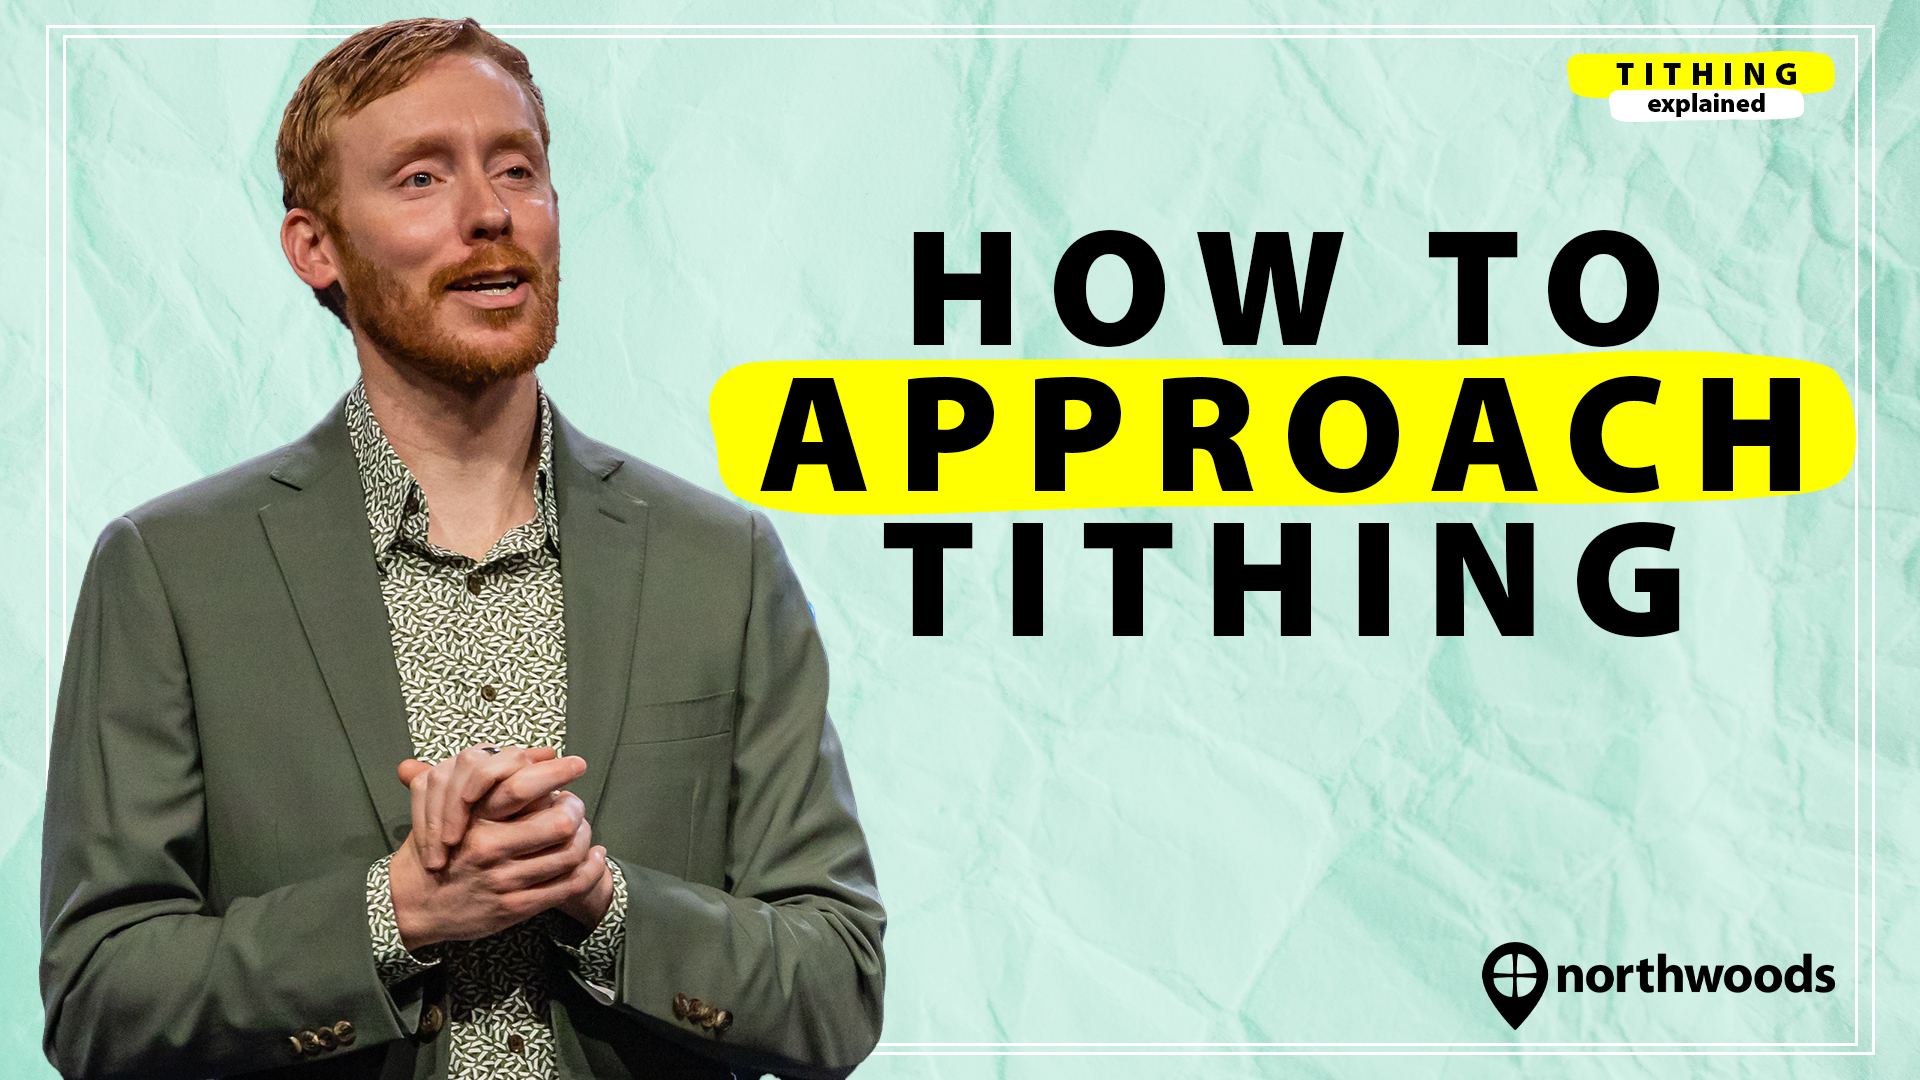 How To Approach Tithing